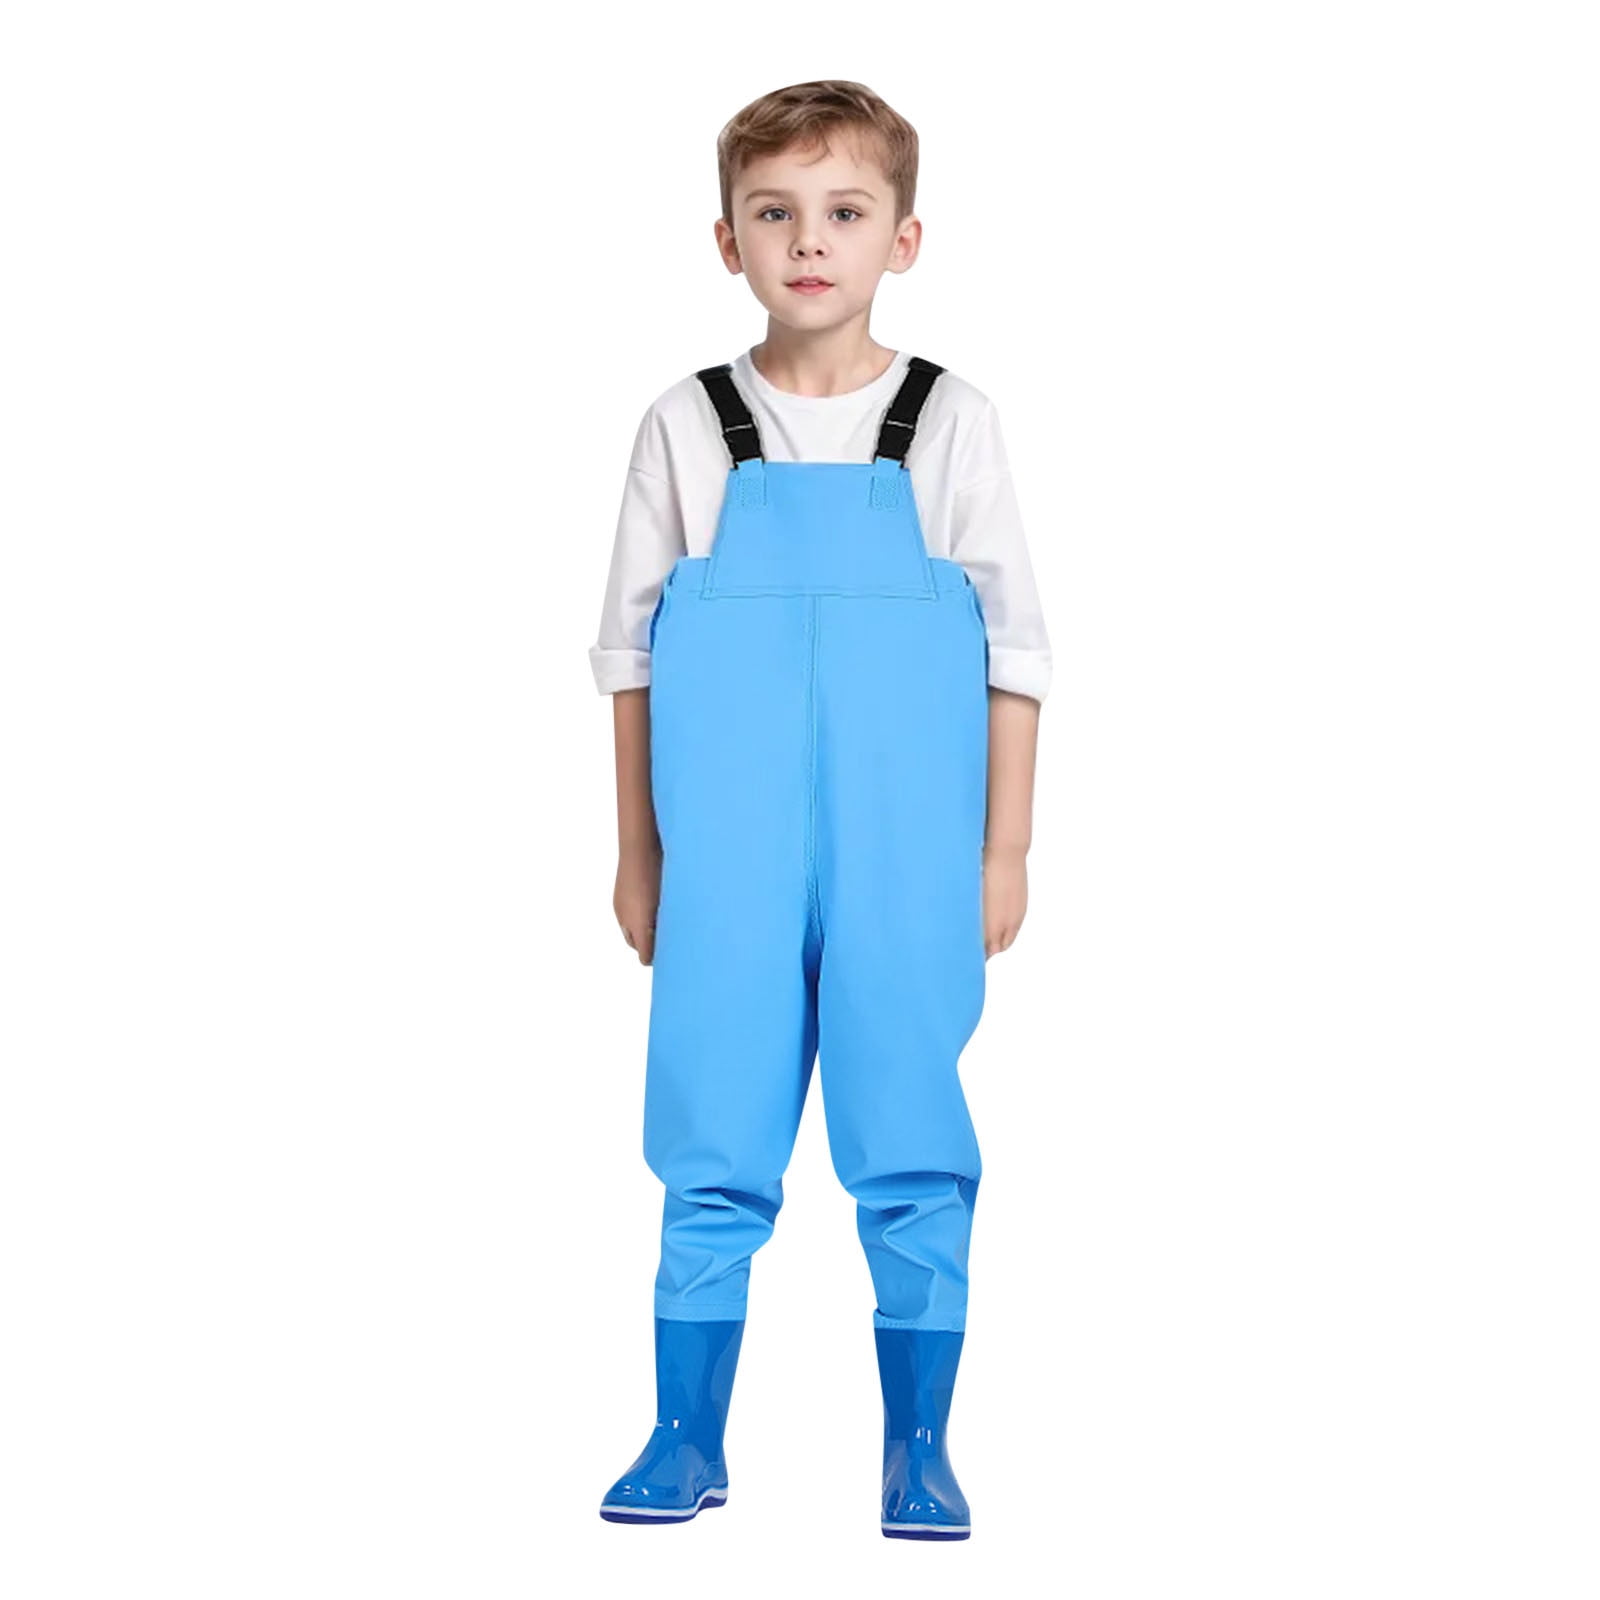 Kcodviy Kids Chest Waders Youth Fishing Waders For Toddler